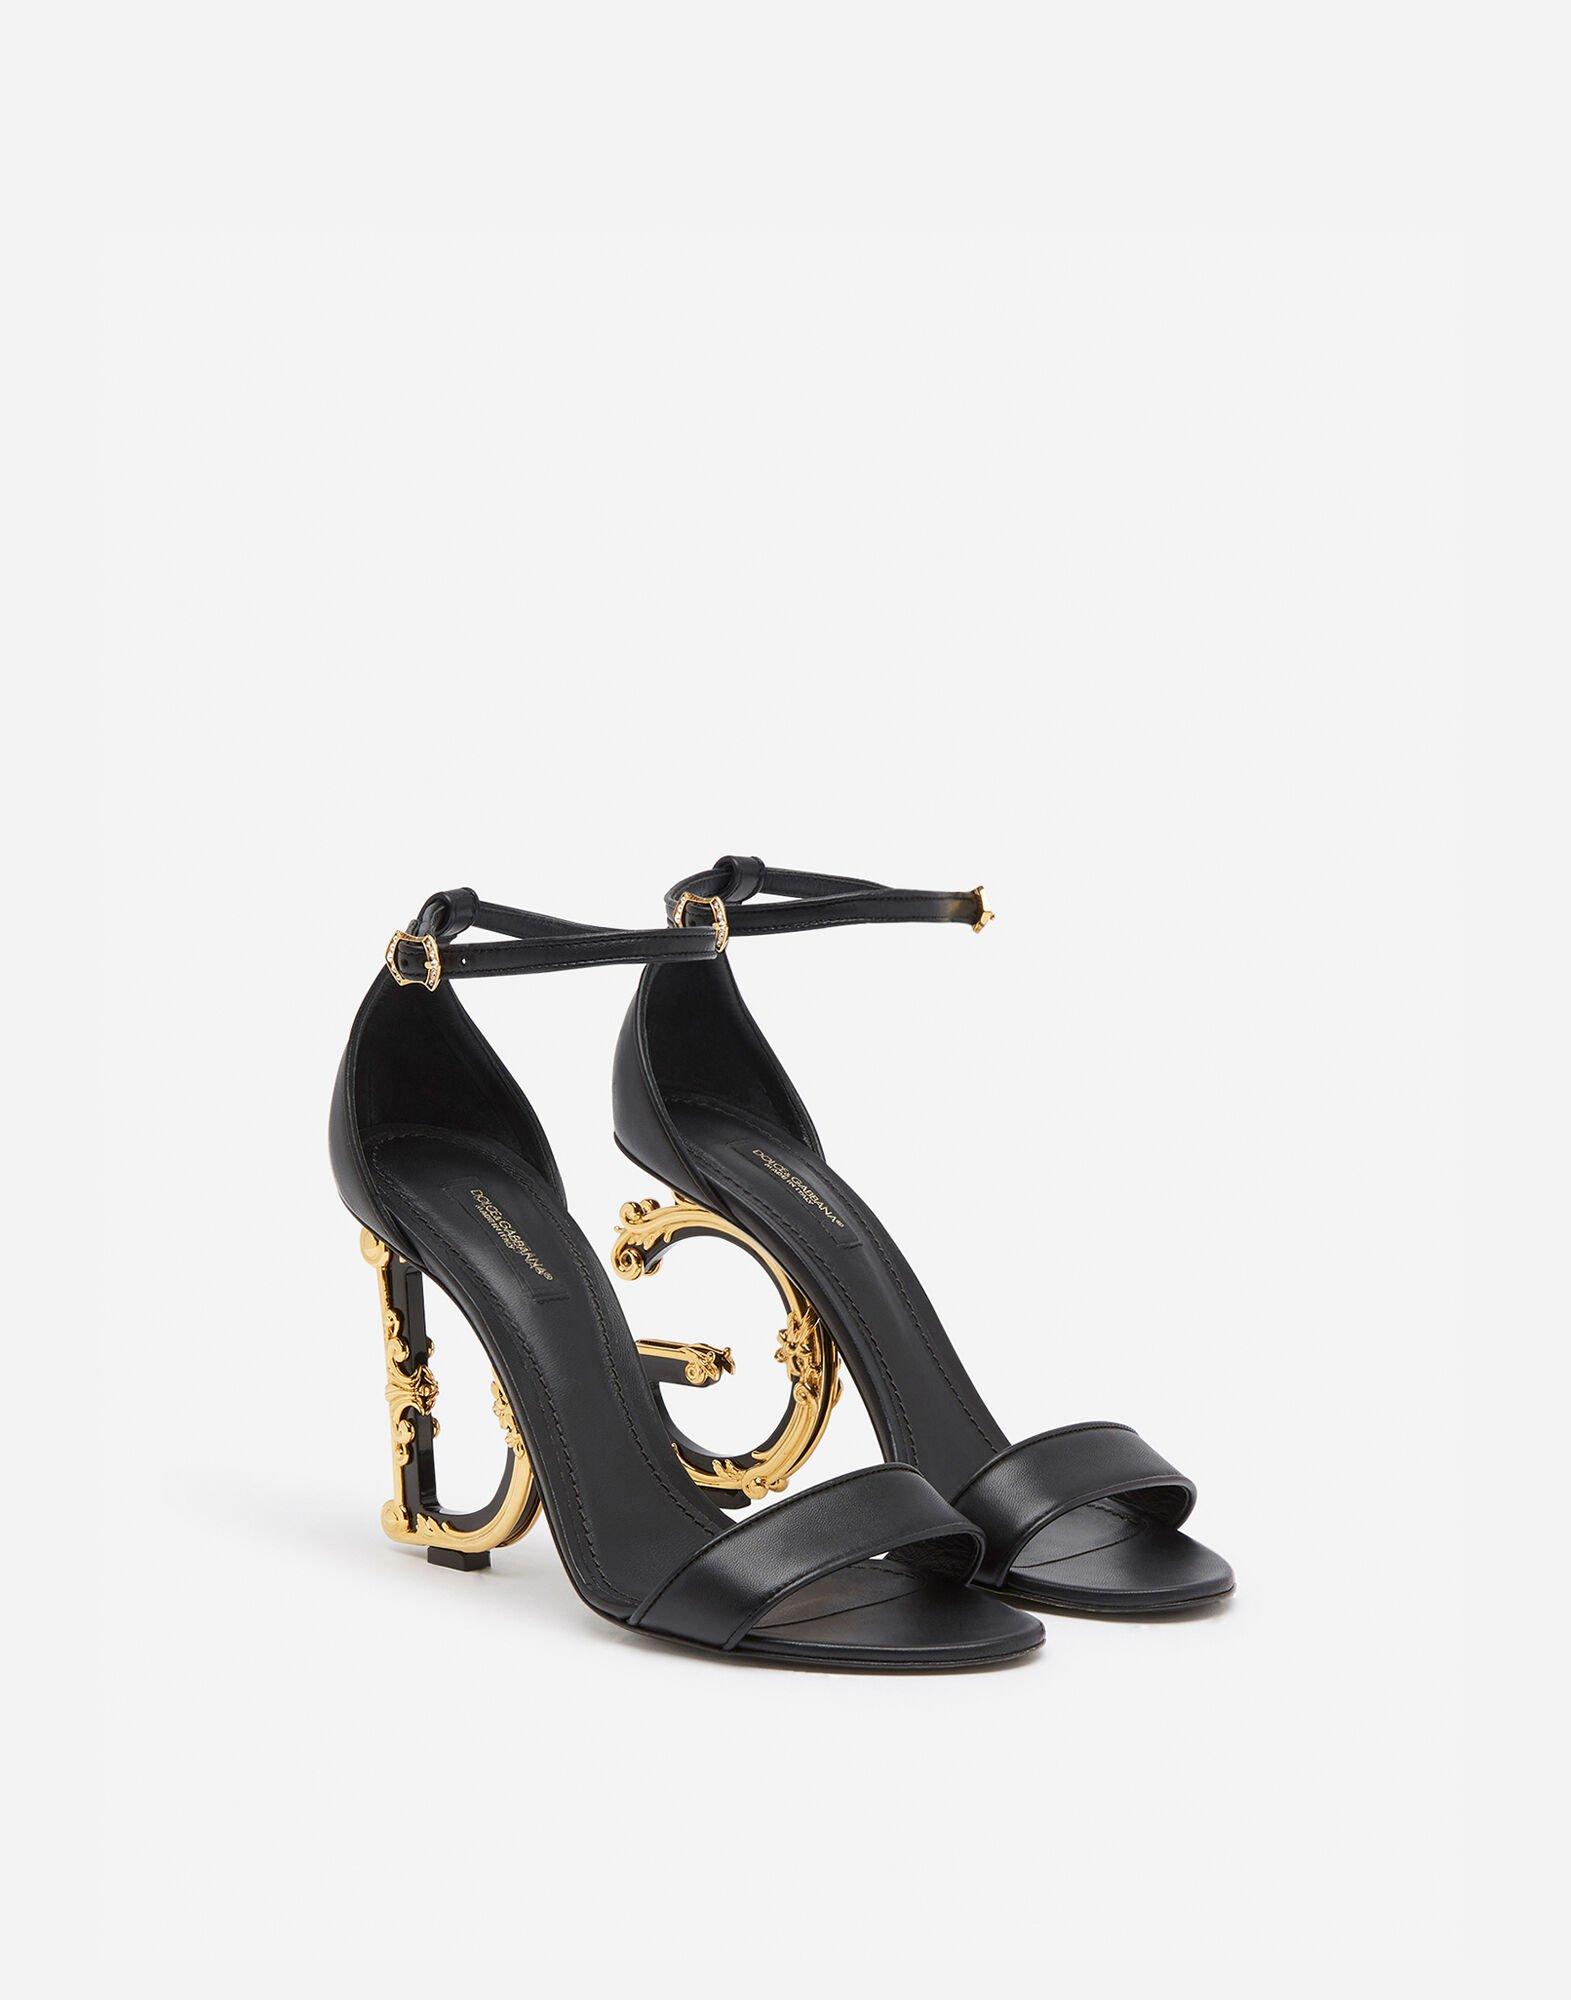 Dolce & Gabbana Nappa Leather Sandals With Baroque D&g Heel in Black - Lyst